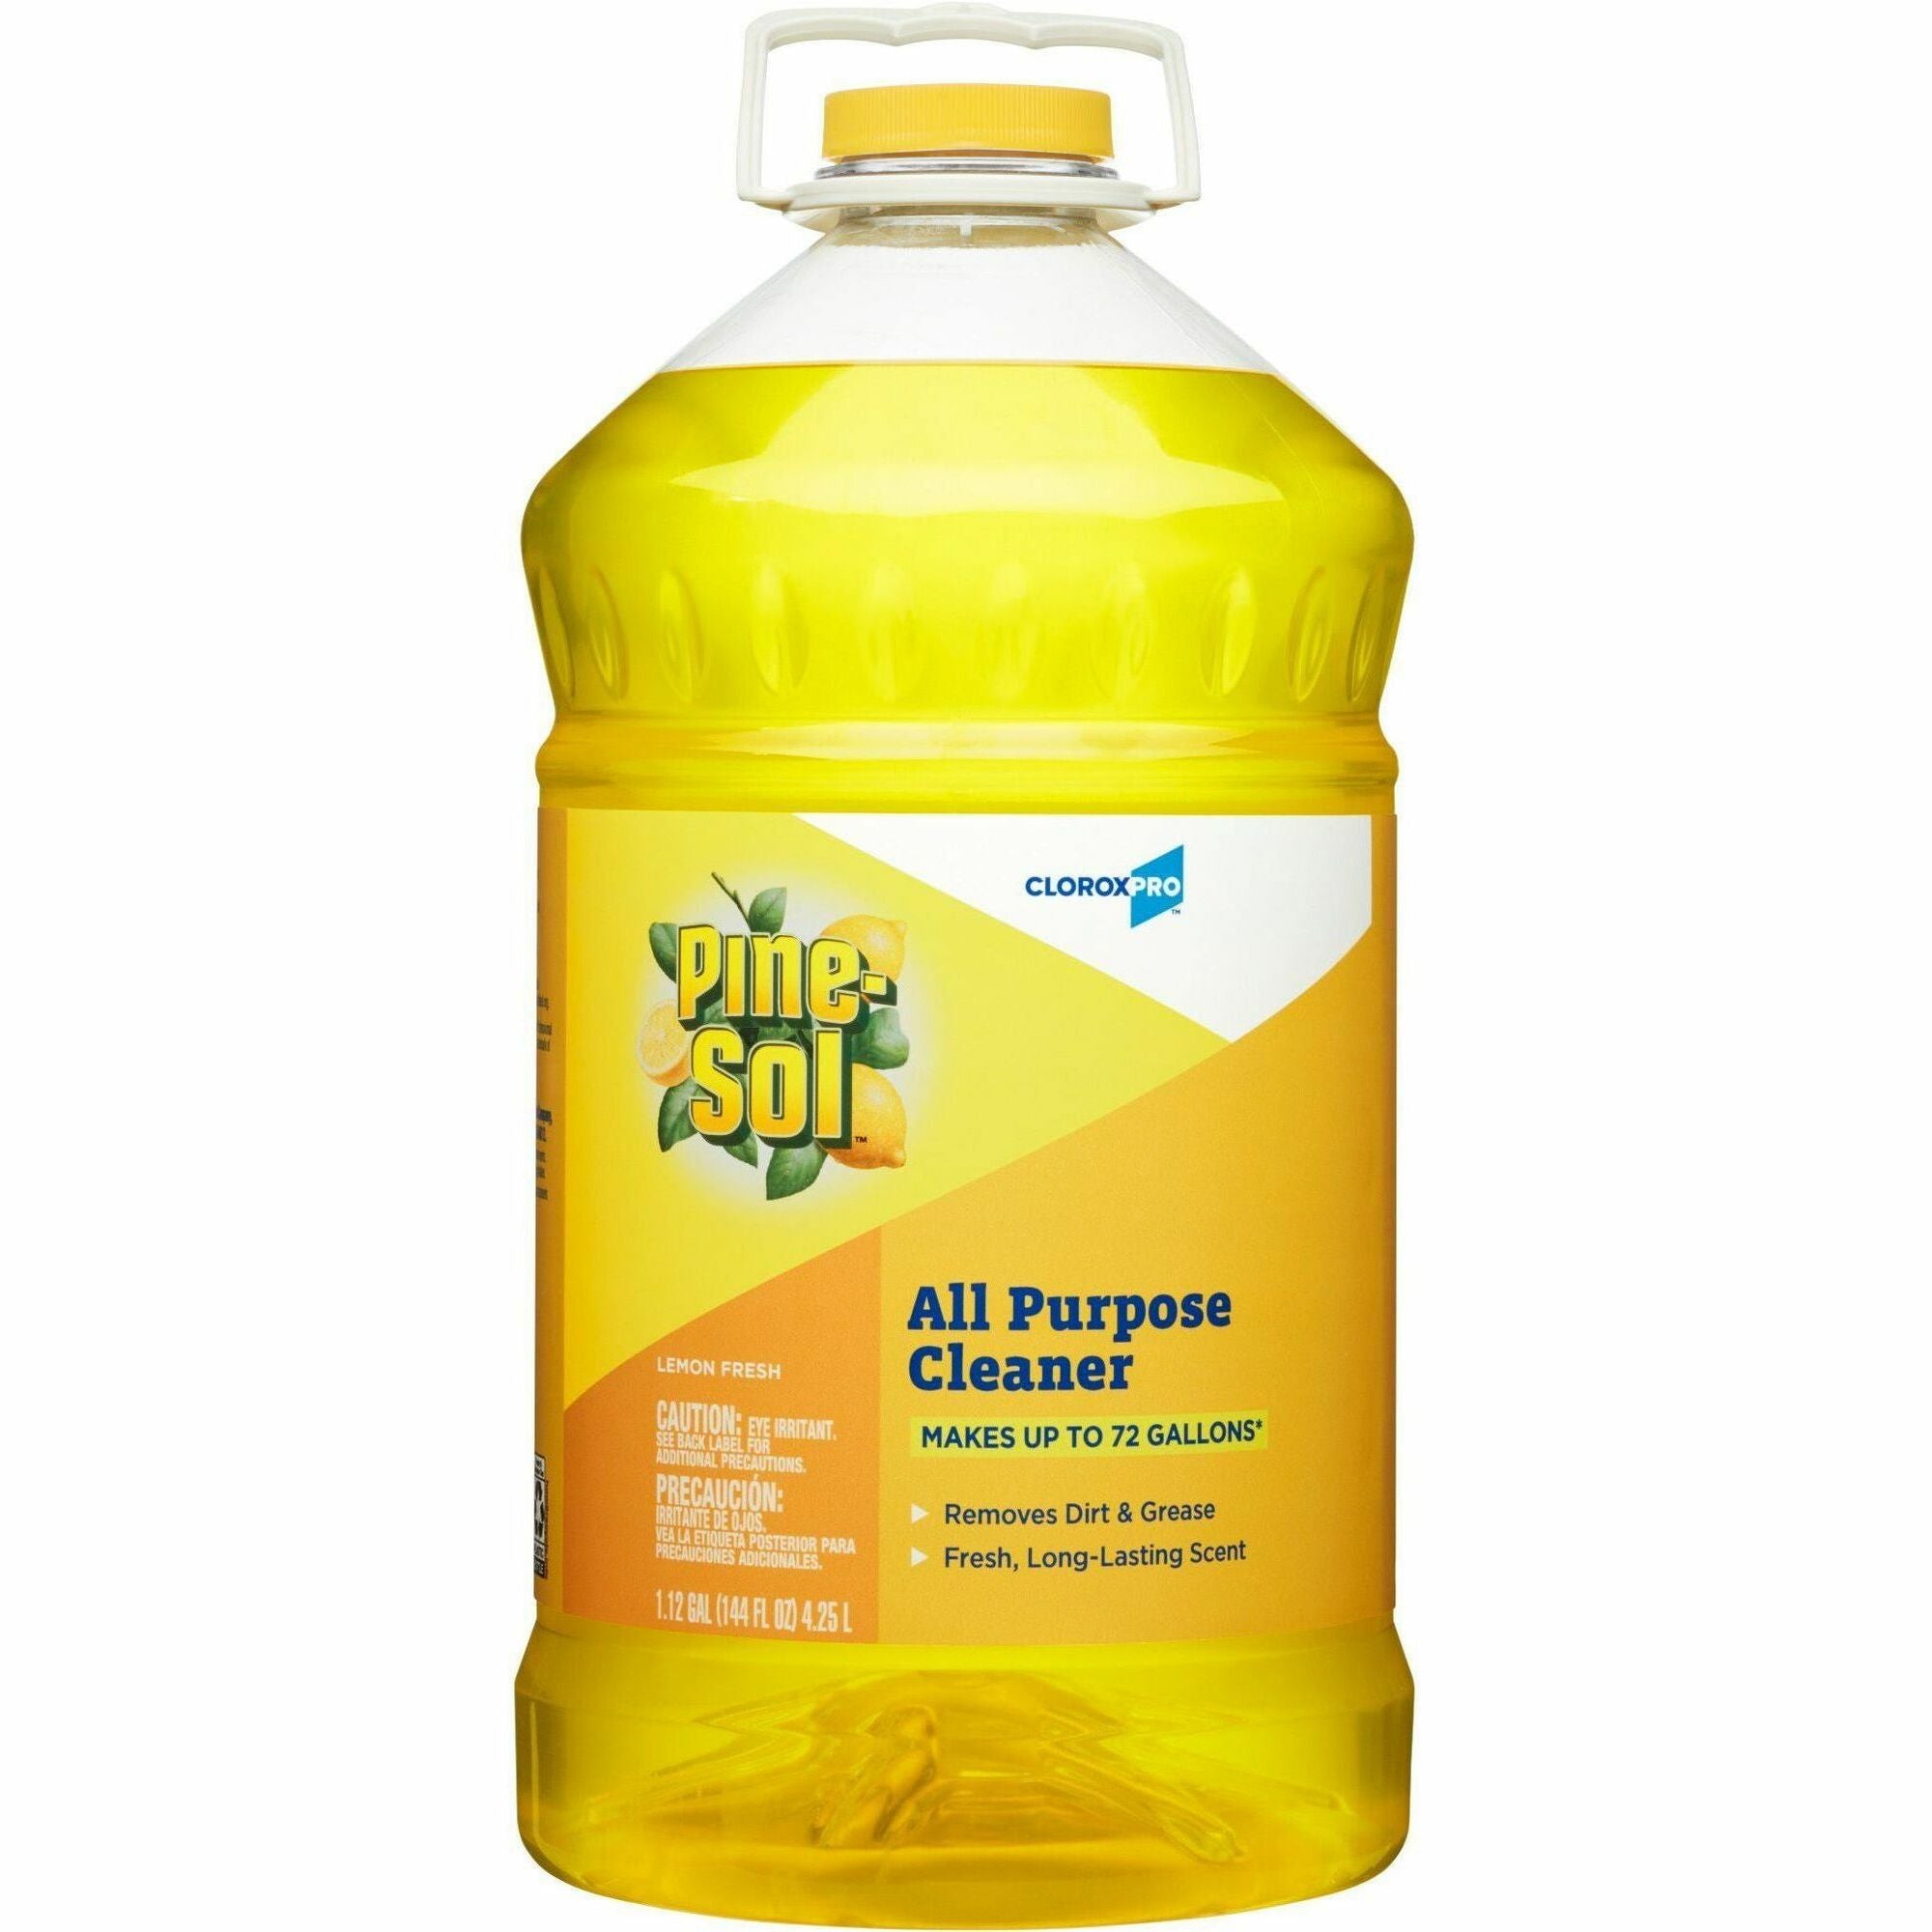 CloroxPro Pine-Sol All Purpose Cleaner - Concentrate - 144 fl oz (4.5 quart) - Lemon Fresh Scent - 126 / Pallet - Deodorize, Residue-free, Antibacterial - Clear, Pale Yellow - 1